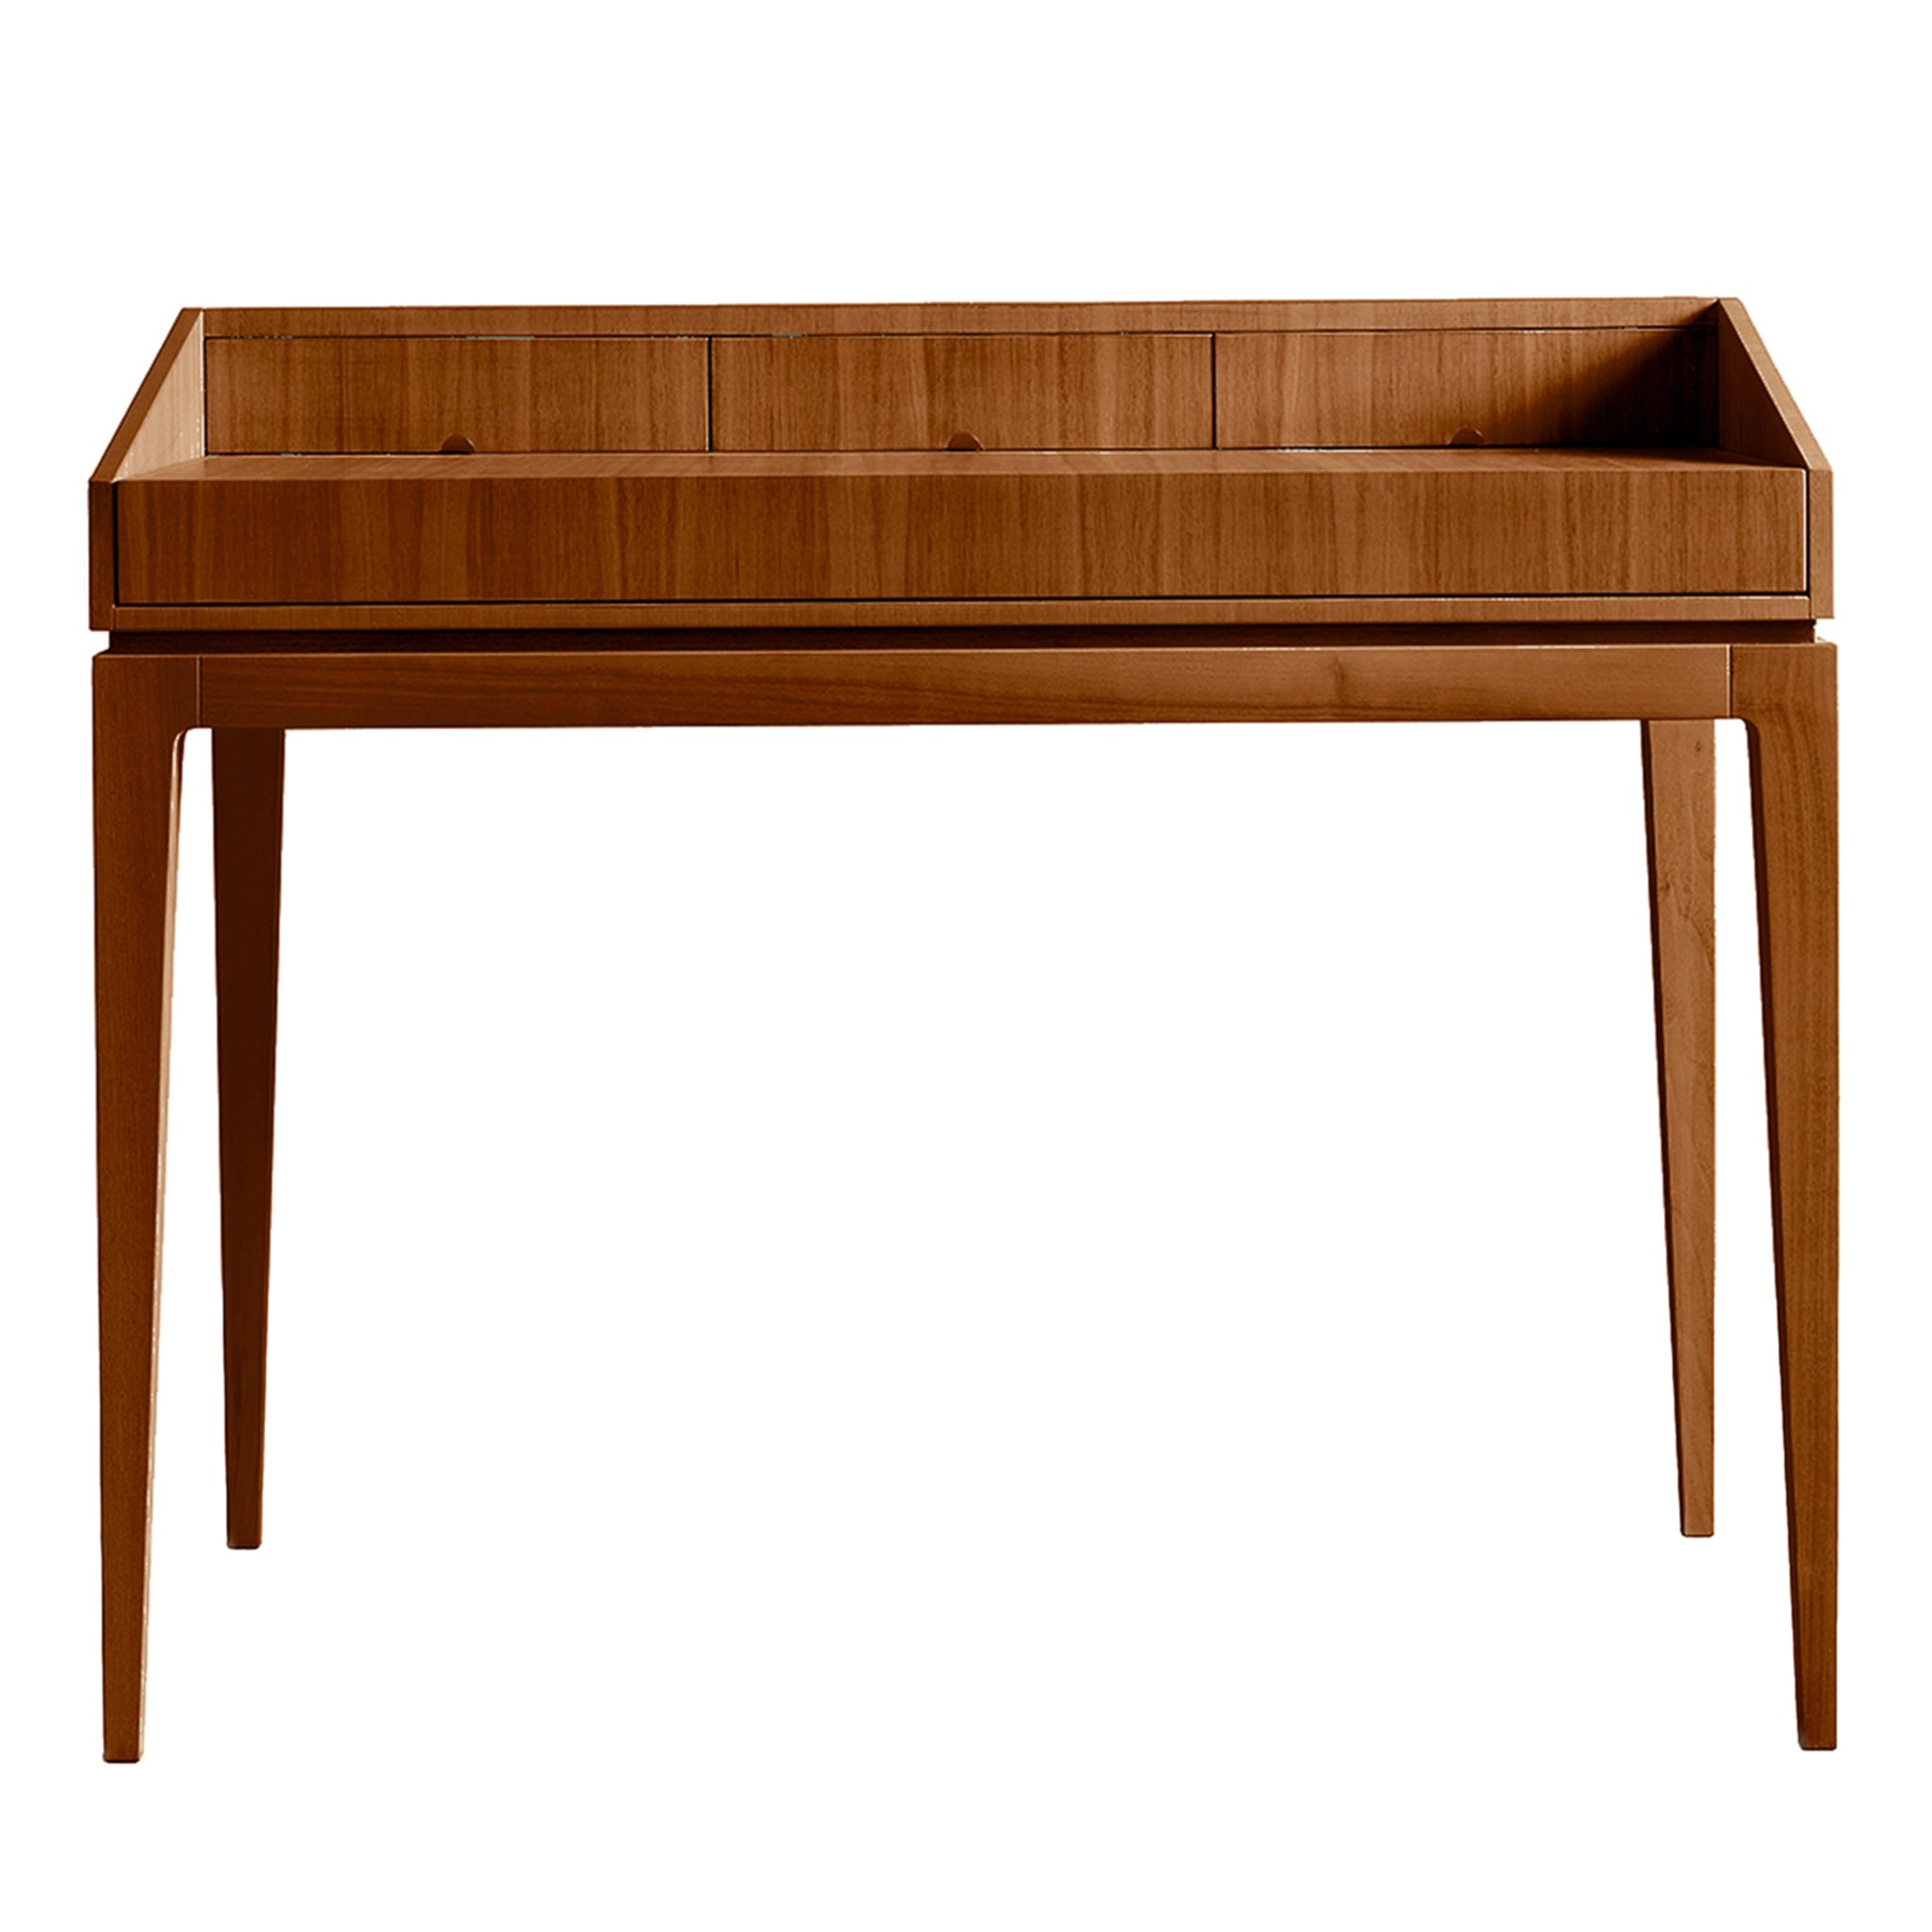 Ideale writing desk #1 - Main view